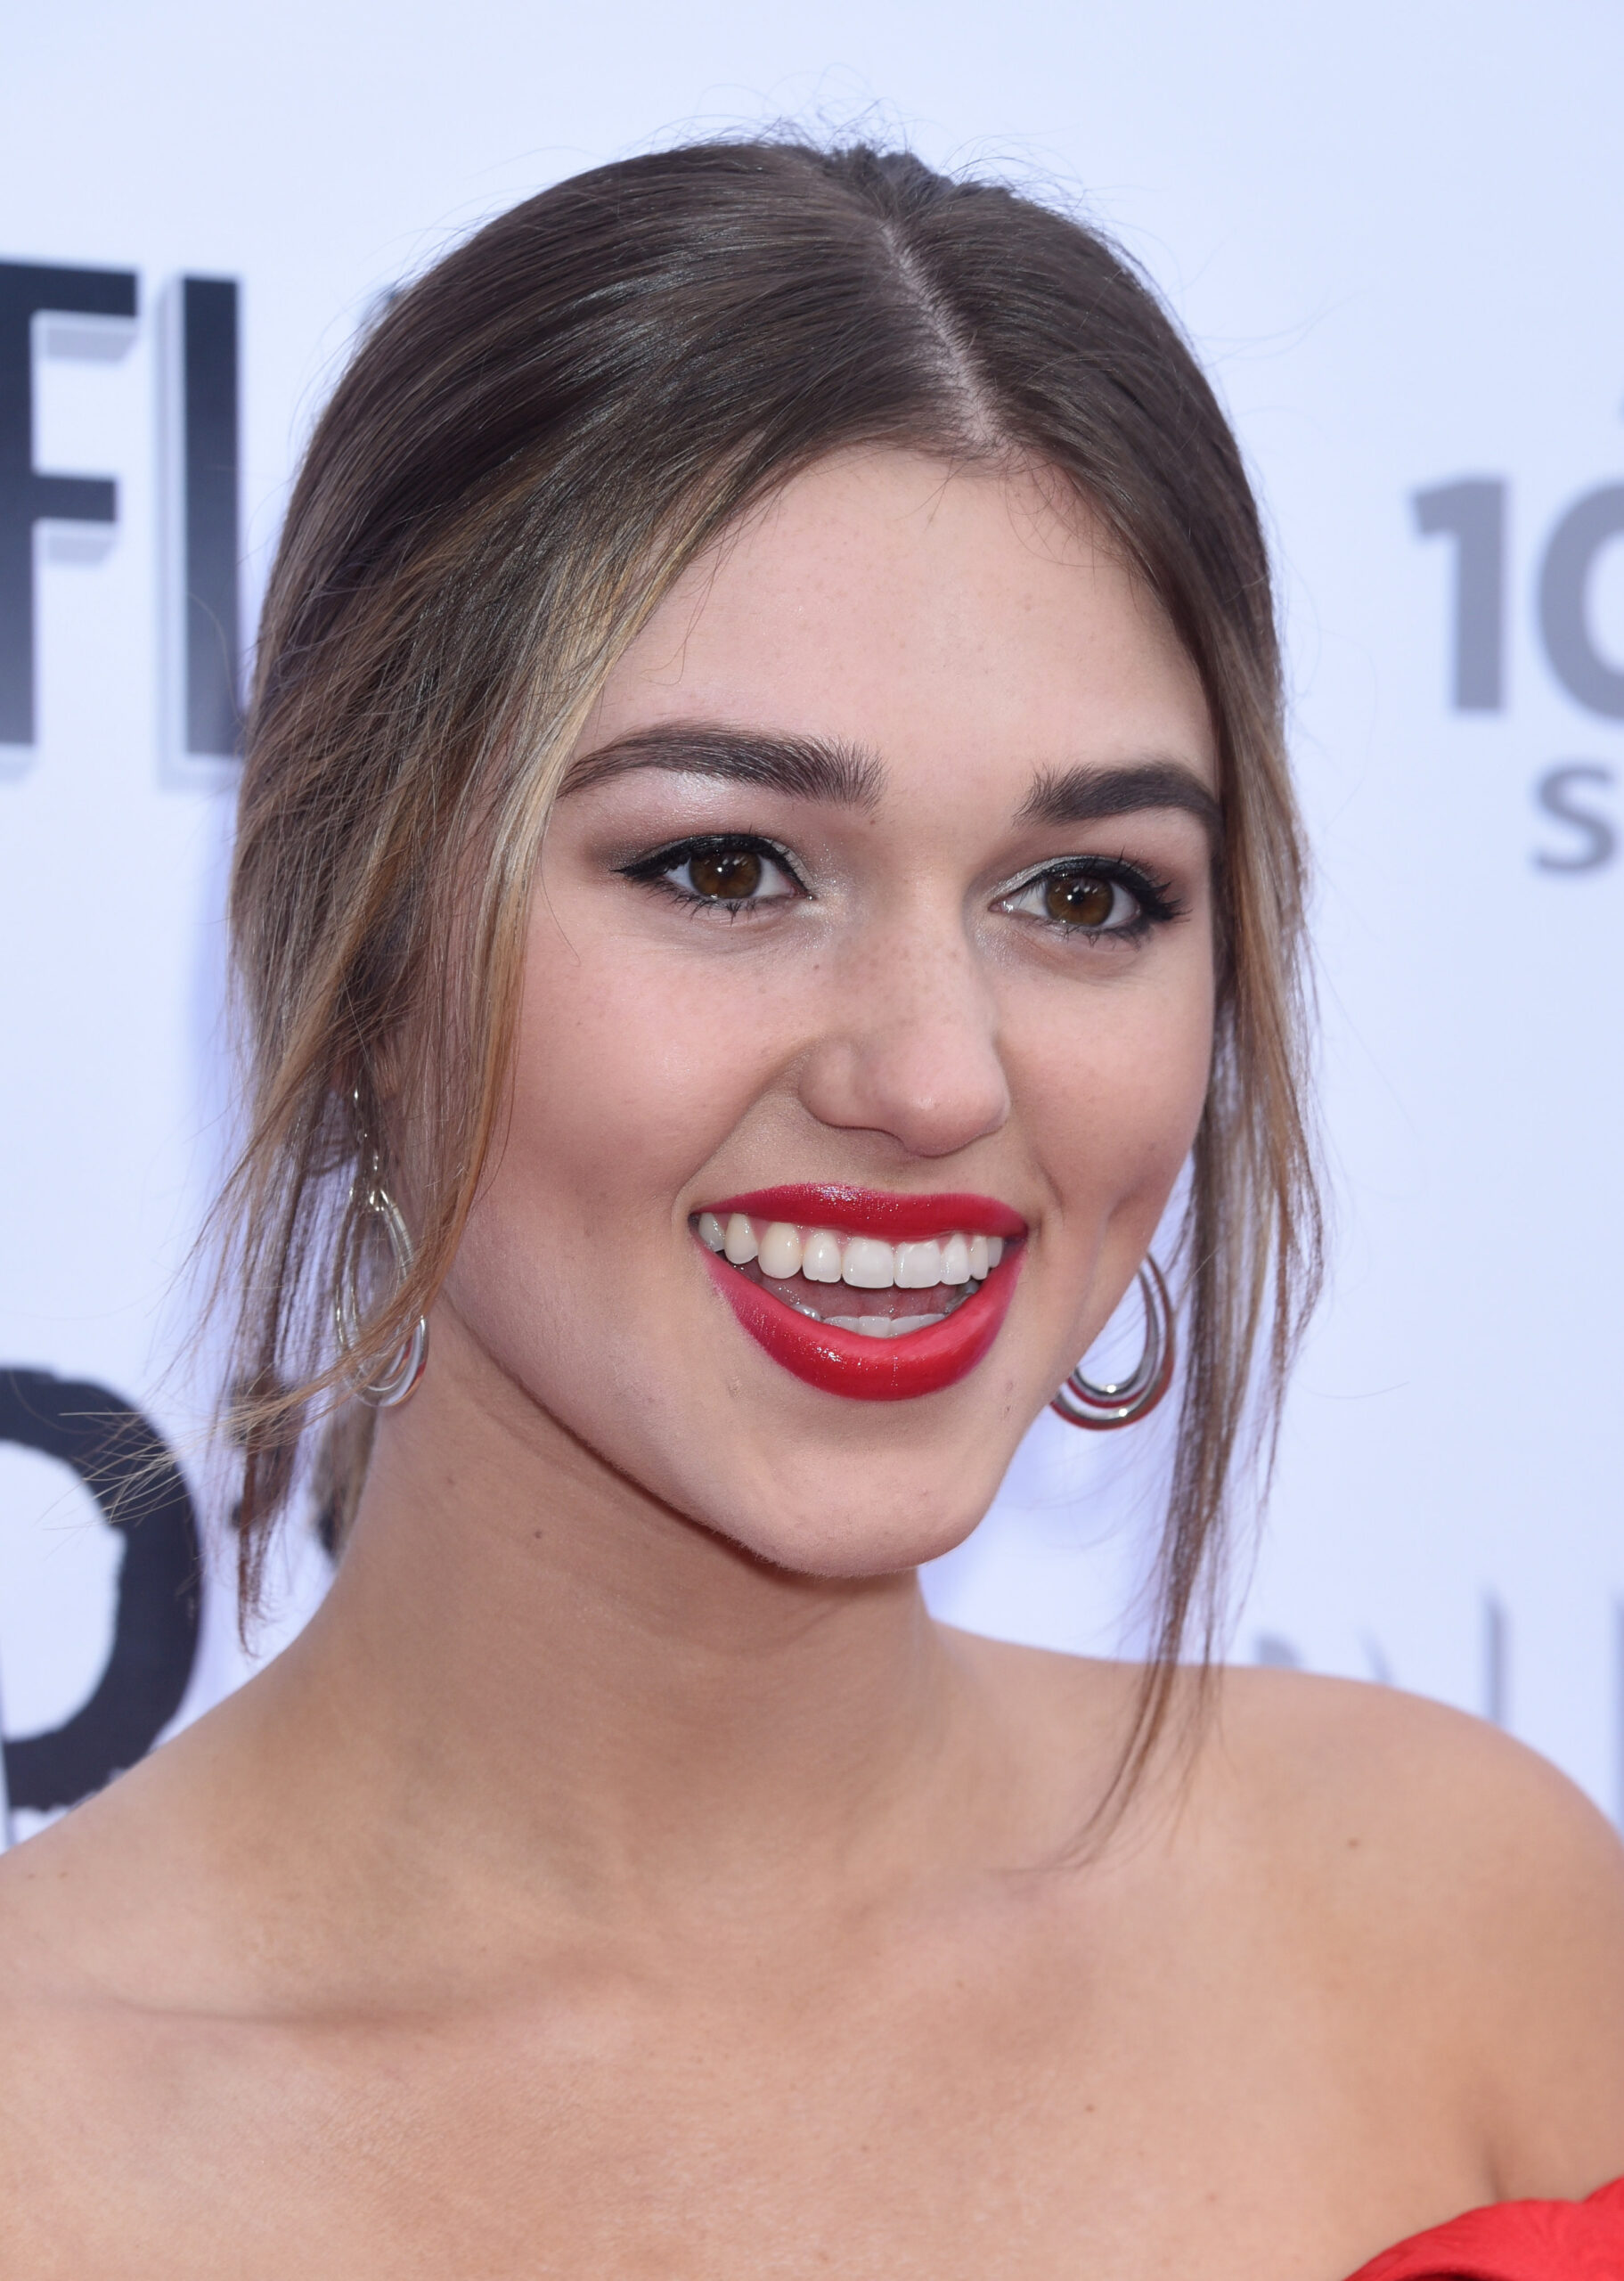 Duck Dynasty Star Sadie Robertson Calls On Her Fans To 